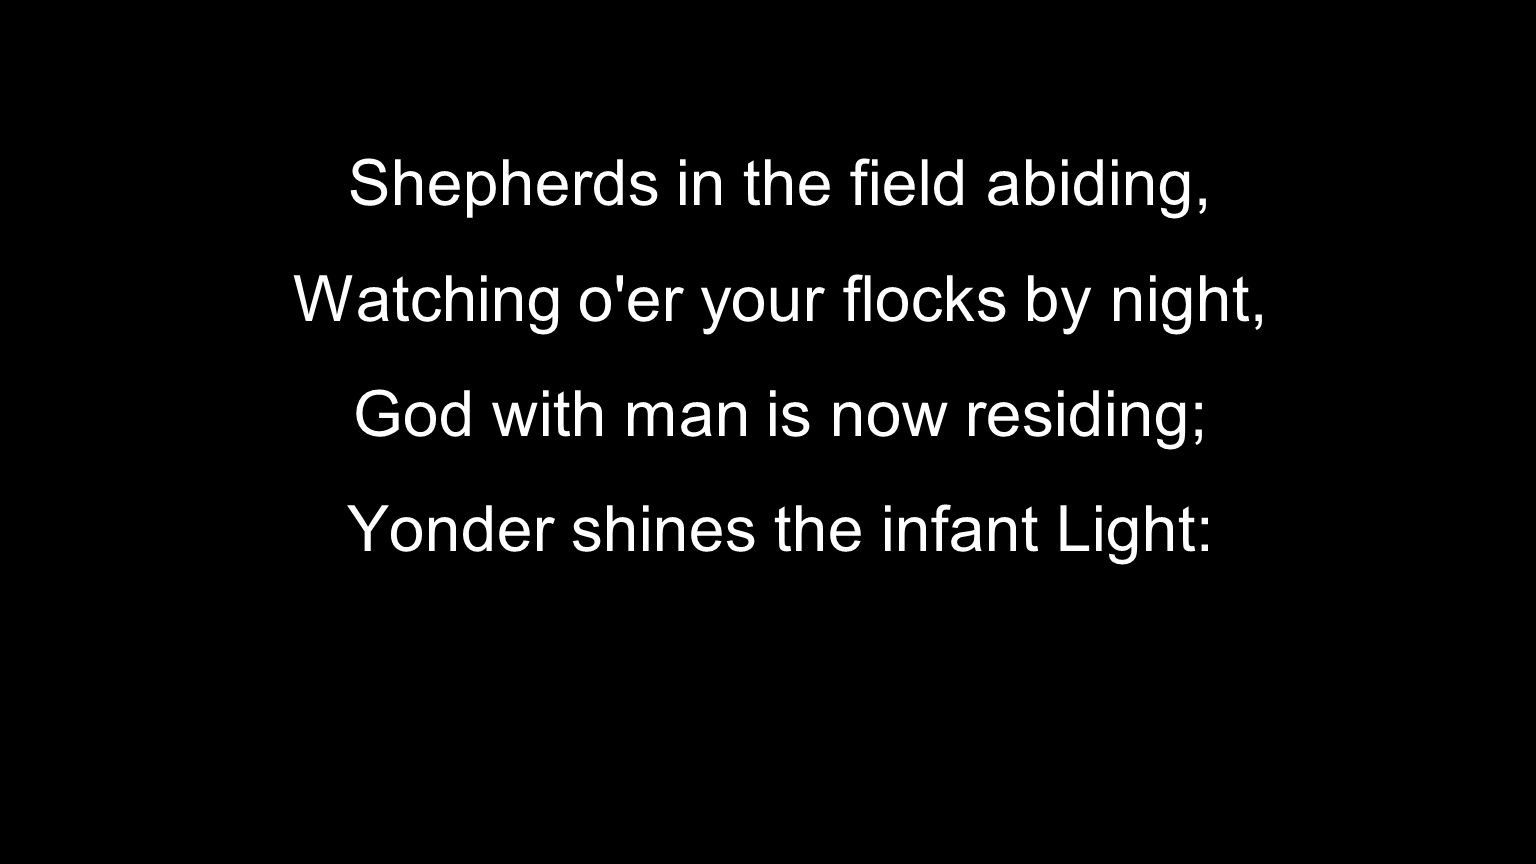 Shepherds in the field abiding, Watching o er your flocks by night, God with man is now residing; Yonder shines the infant Light: